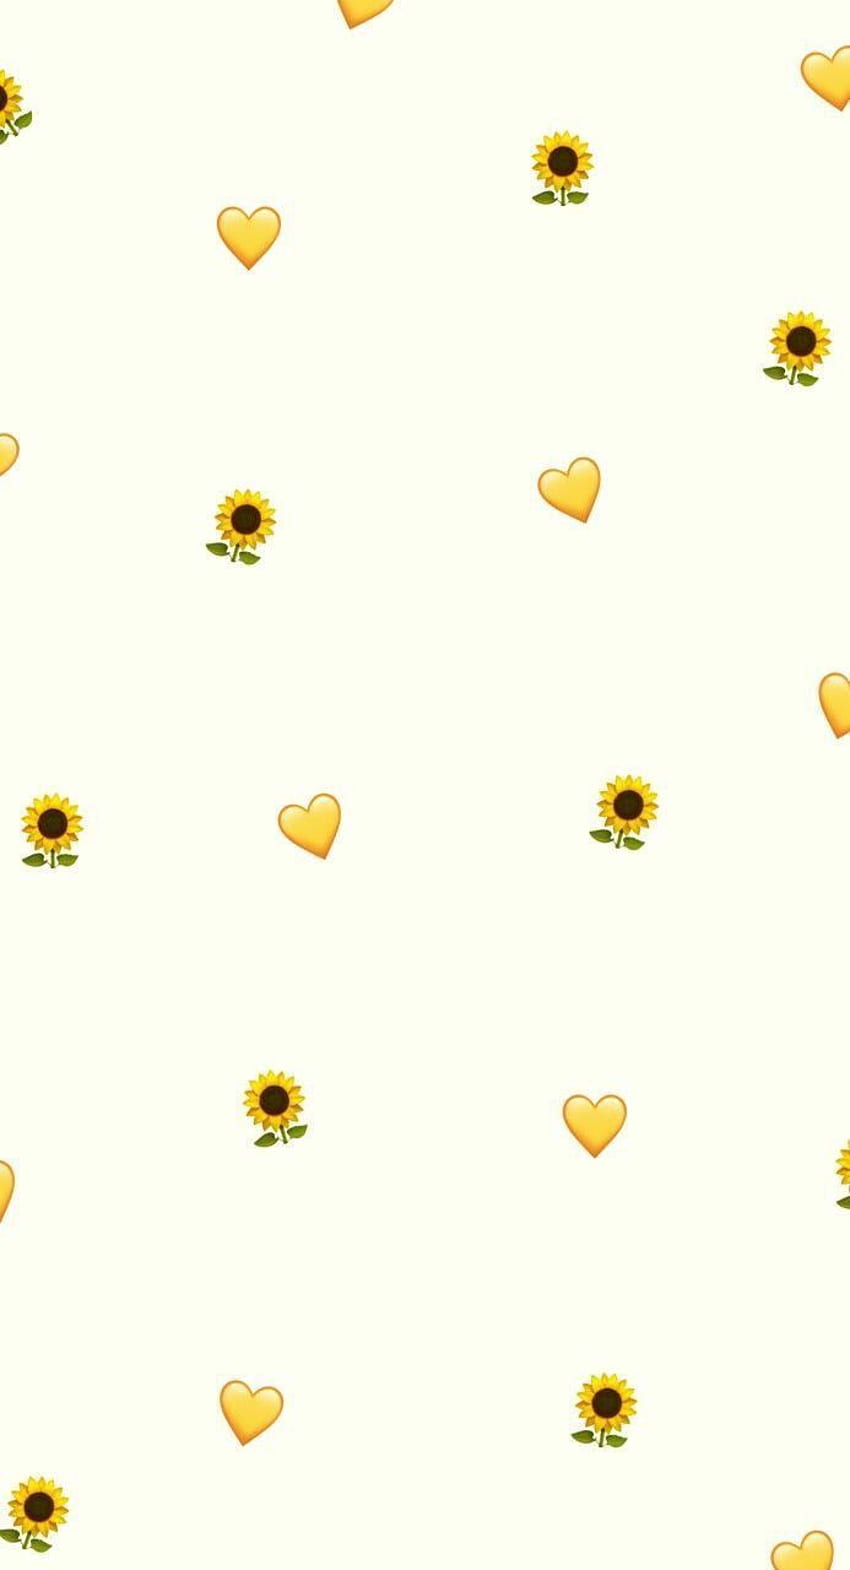 wallpaper wallpaperiphone tumblr cute simple babypink quotes pattern  iphone cool  Sunflower iphone wallpaper Sunflower wallpaper Iphone  wallpaper vsco